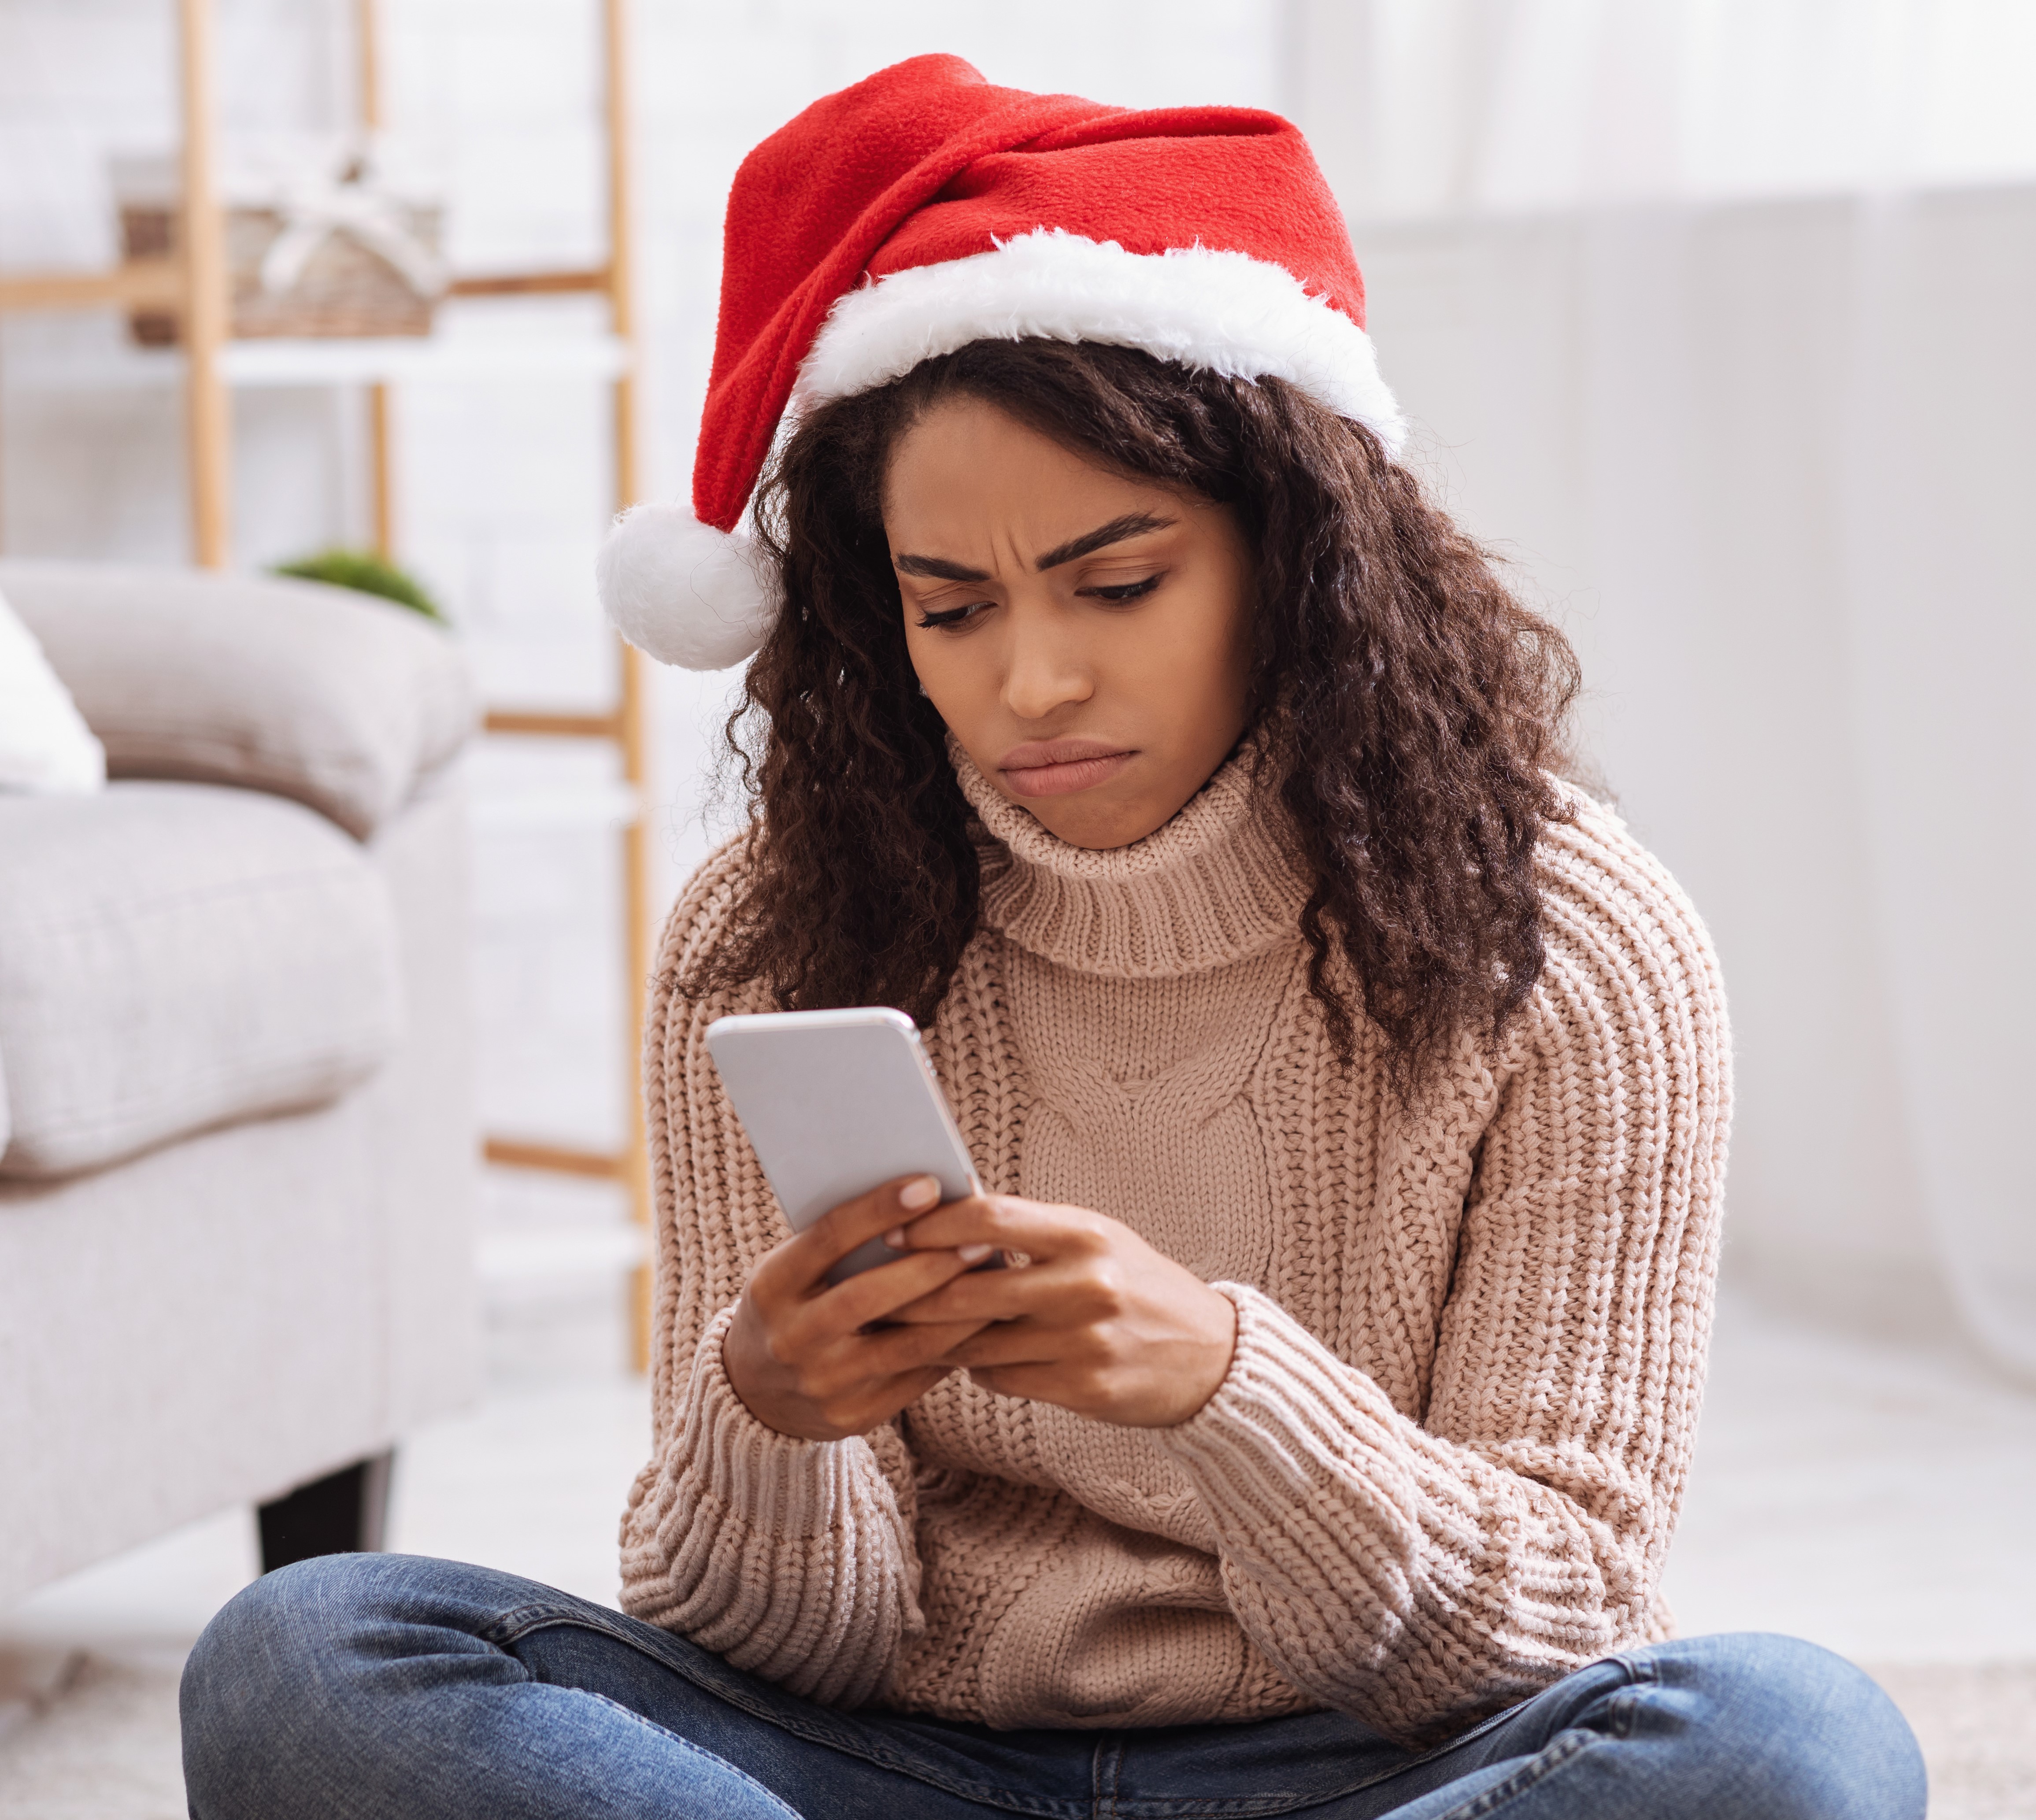 Woman with Santa hat on phone